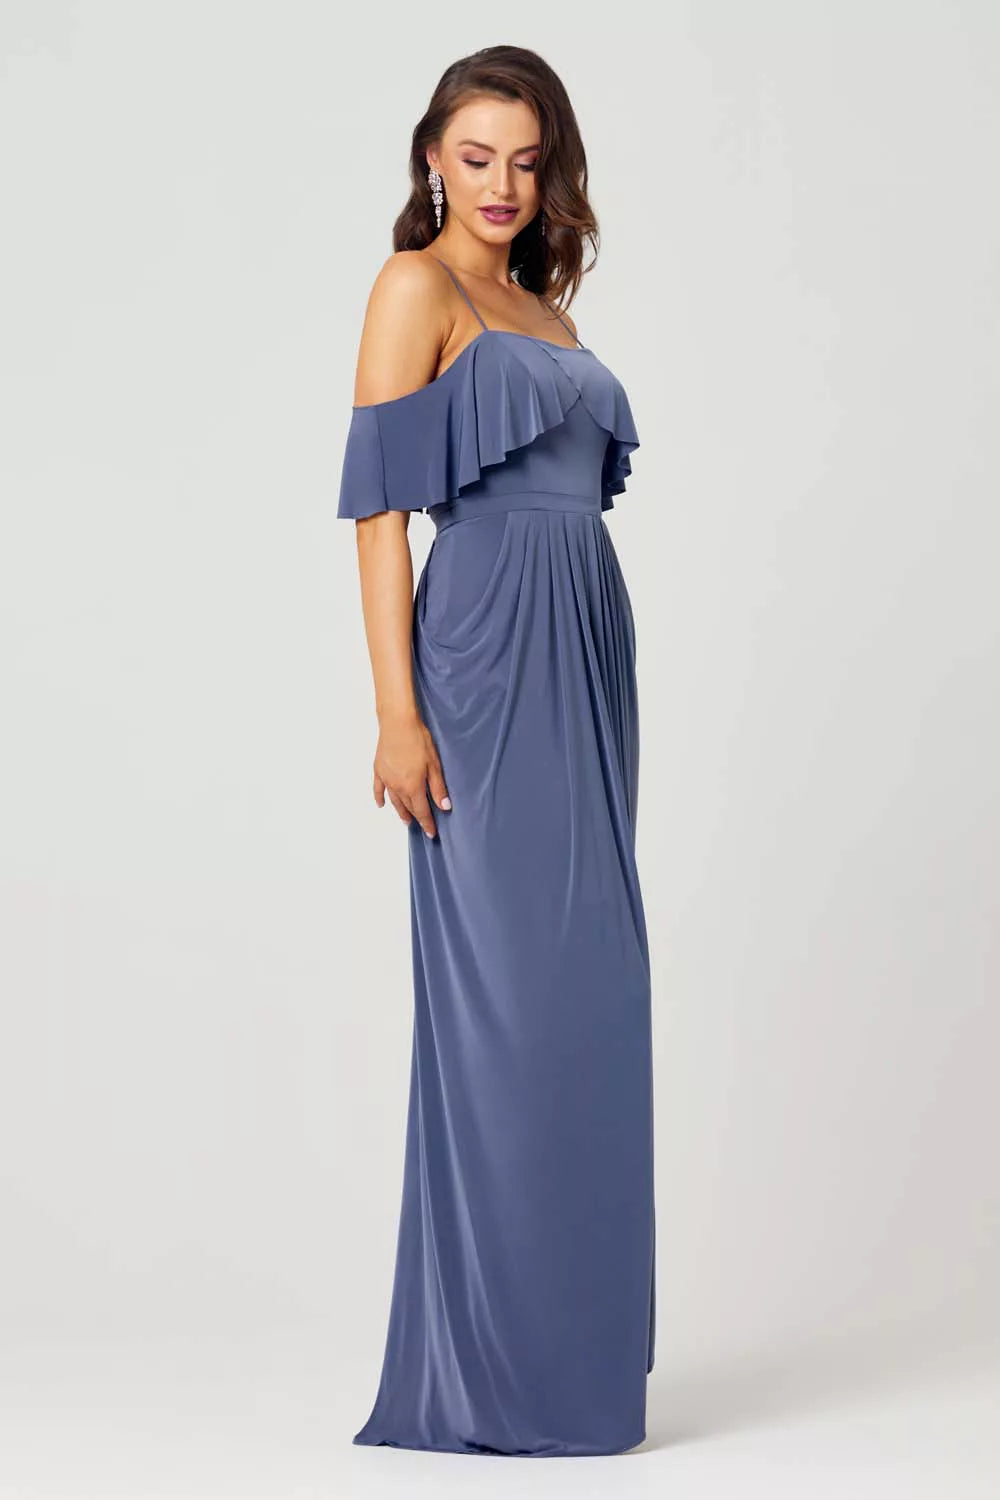 Arianna gown TO803